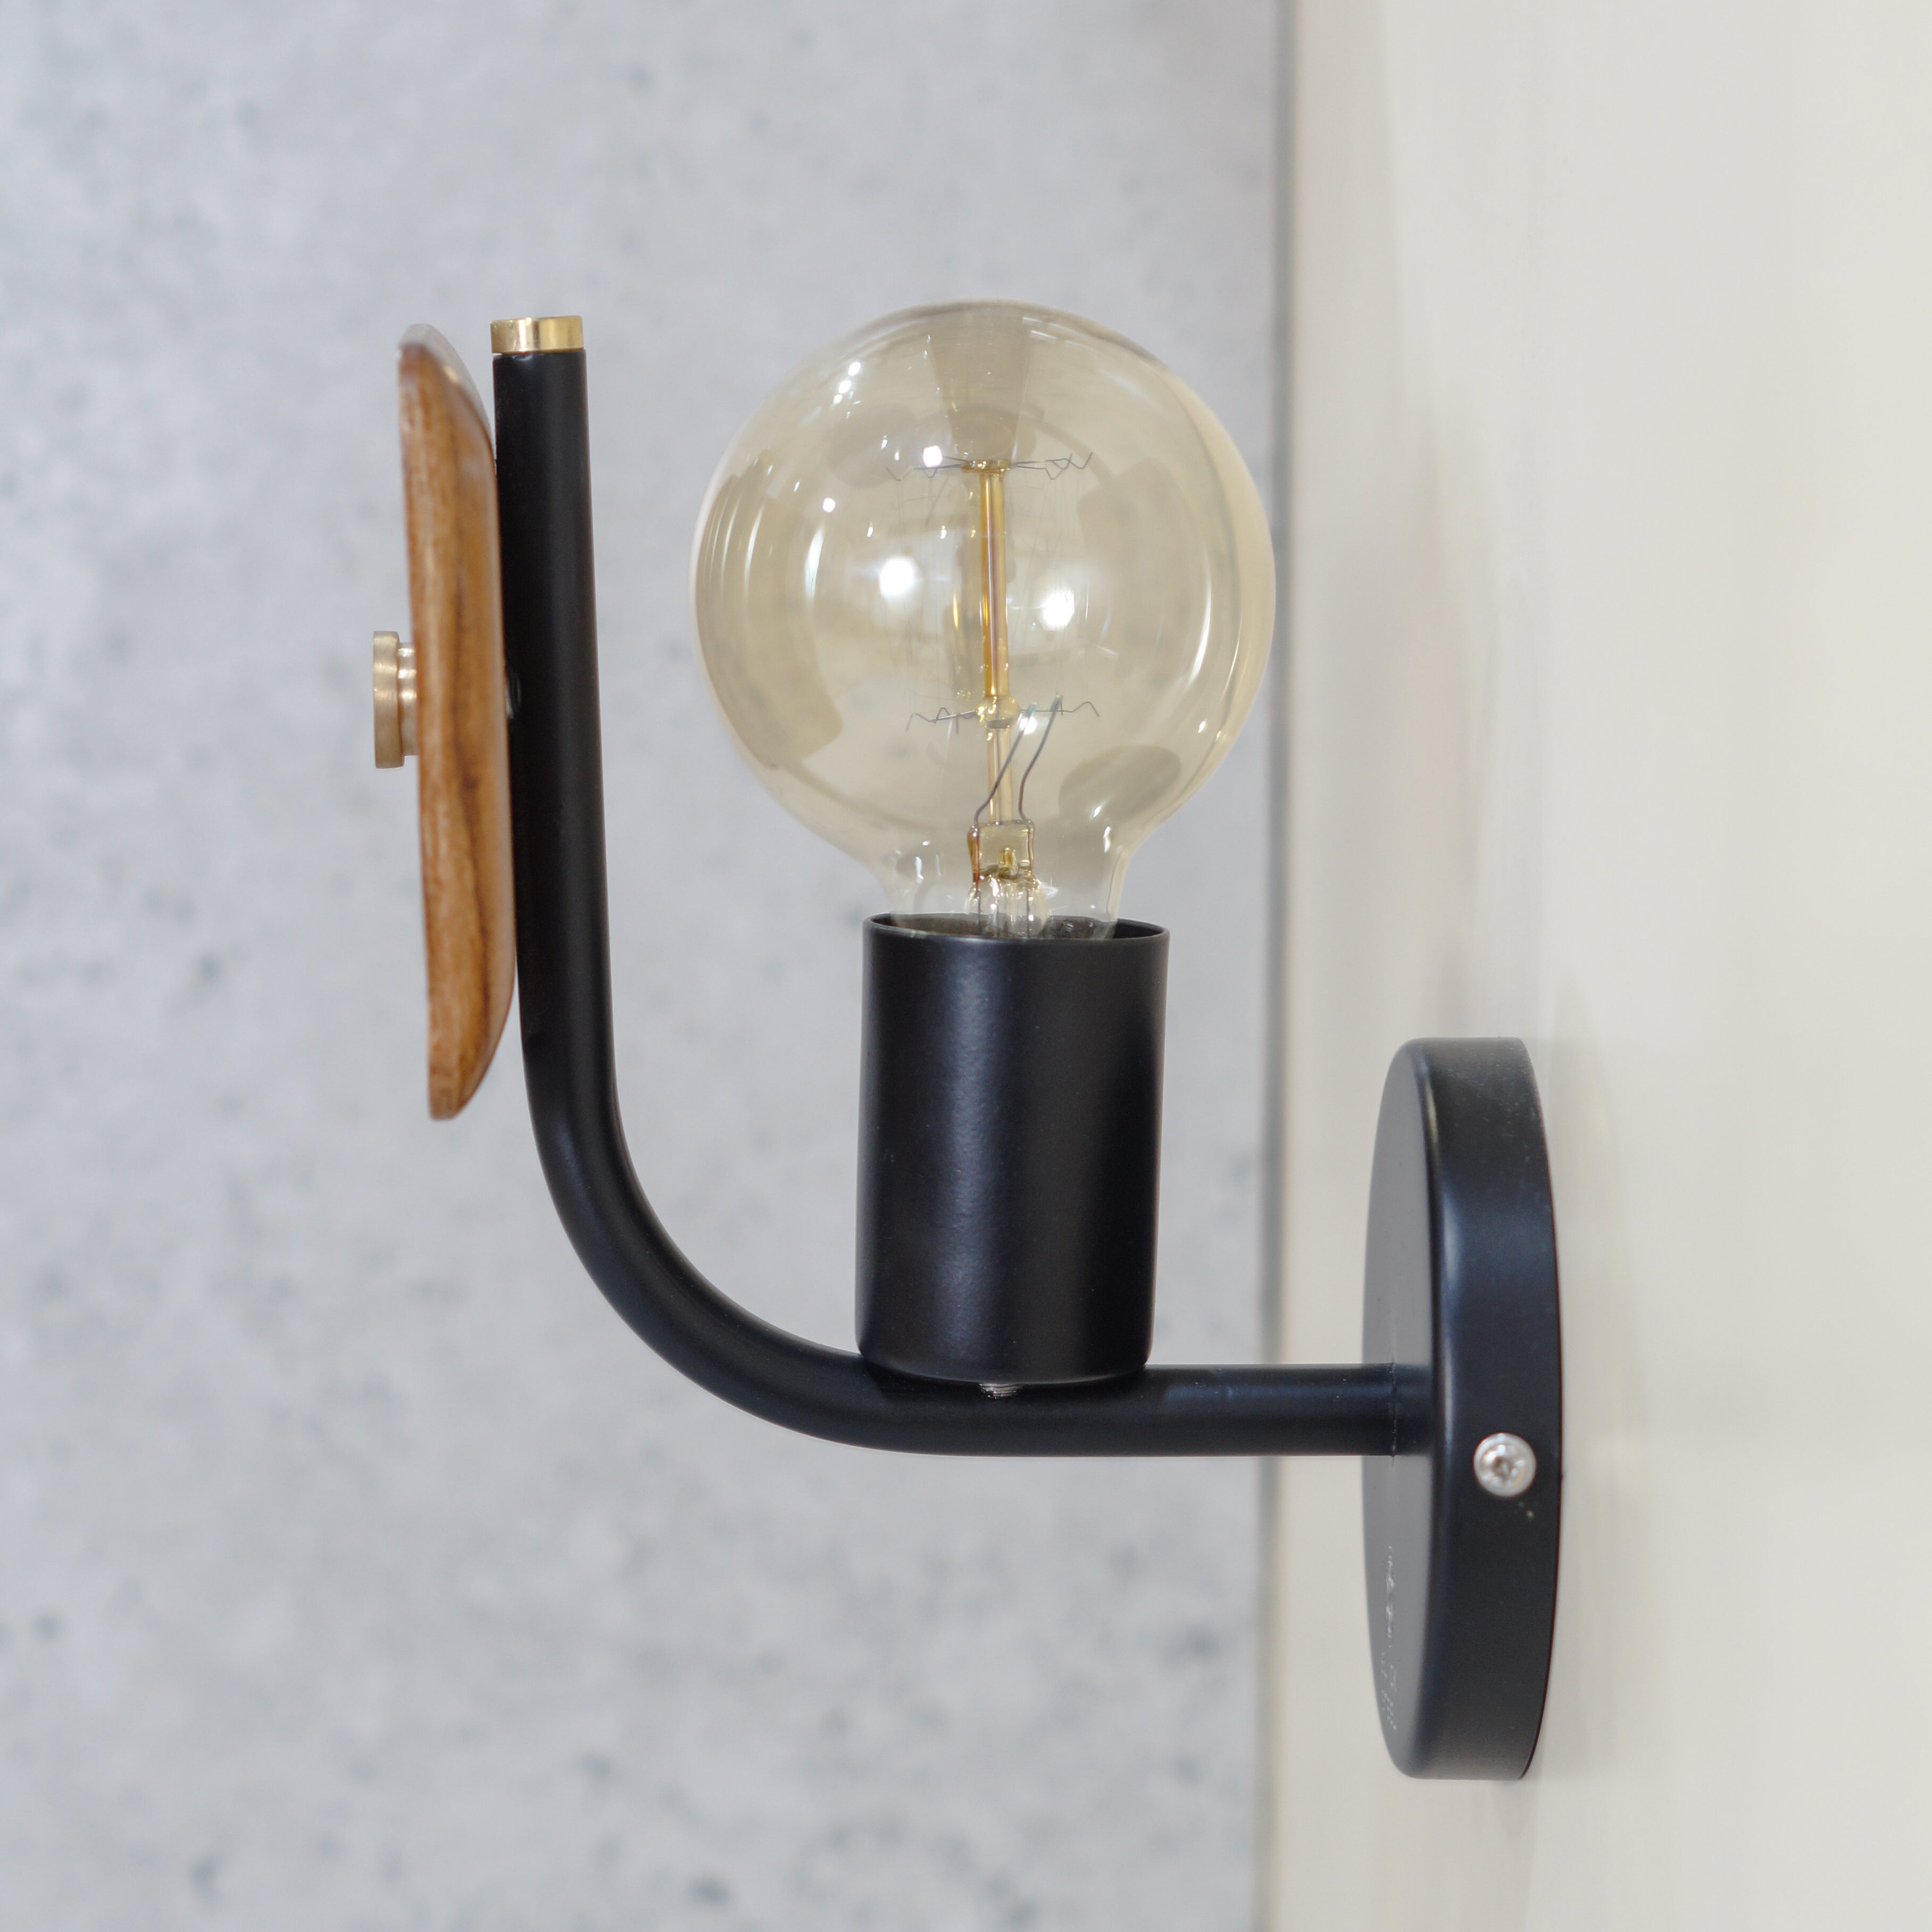 CWS147 Lodge Wooden Wall Sconce – The Black Steel